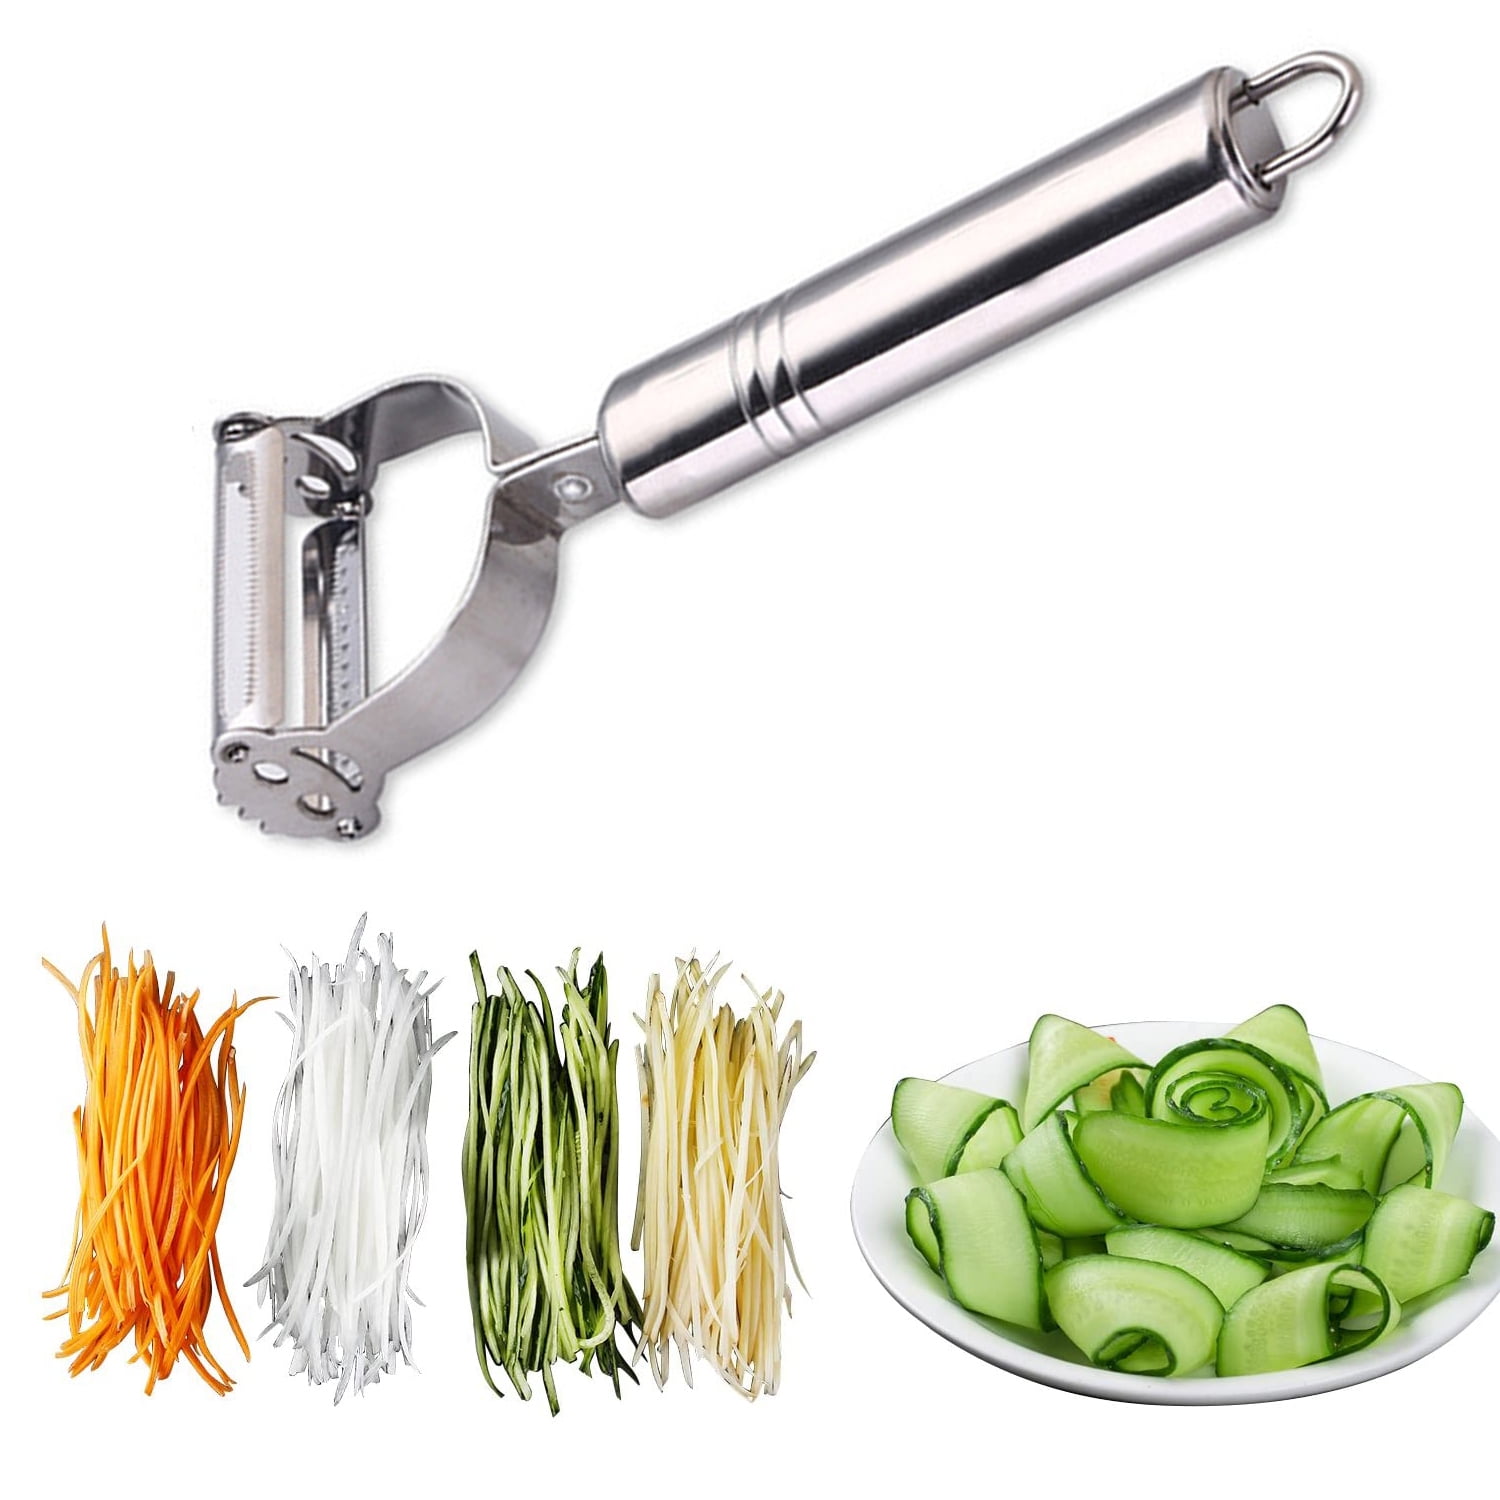 Stainless Steel Potato Peeler Vegetable Fruit Grater Tool with Storage Container 